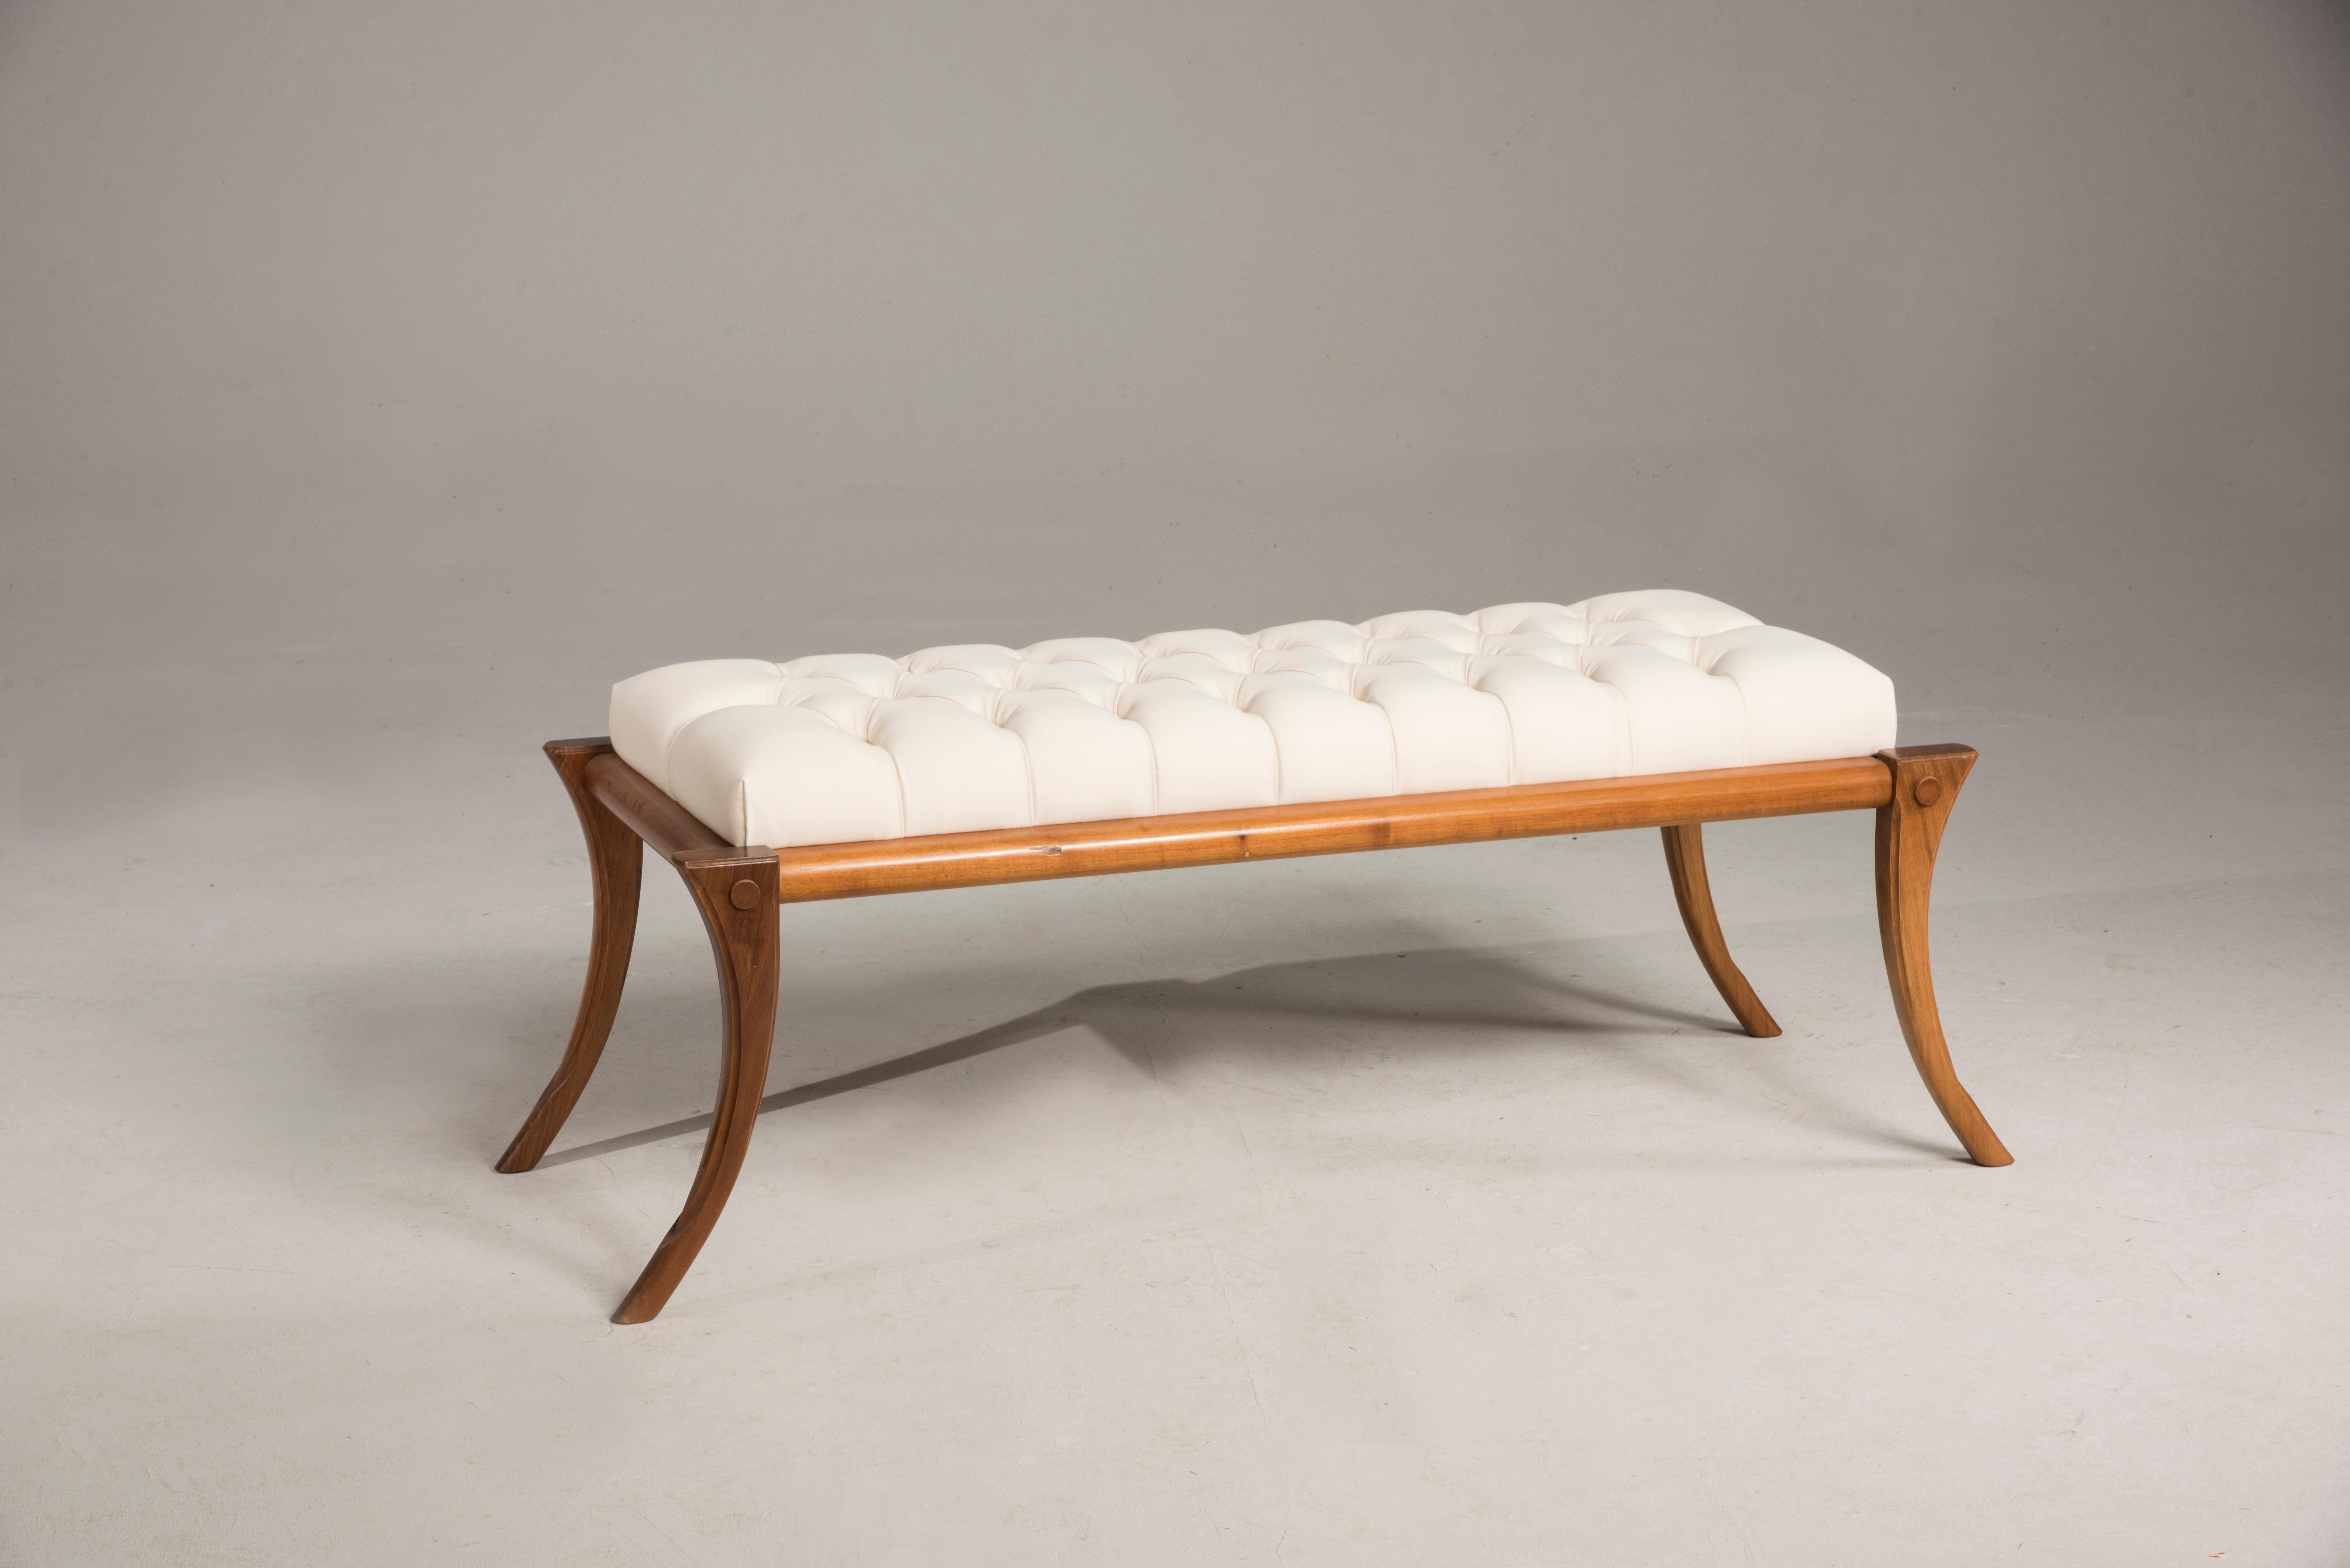 Saber legs walnut wood milk light color seat bench, Customizable upholstery and wood.

Other colors and upholstery are available. Italian artisanal production by Pescetta Home Decoration.

Walnut wood bench made in Italy. It is realized according to